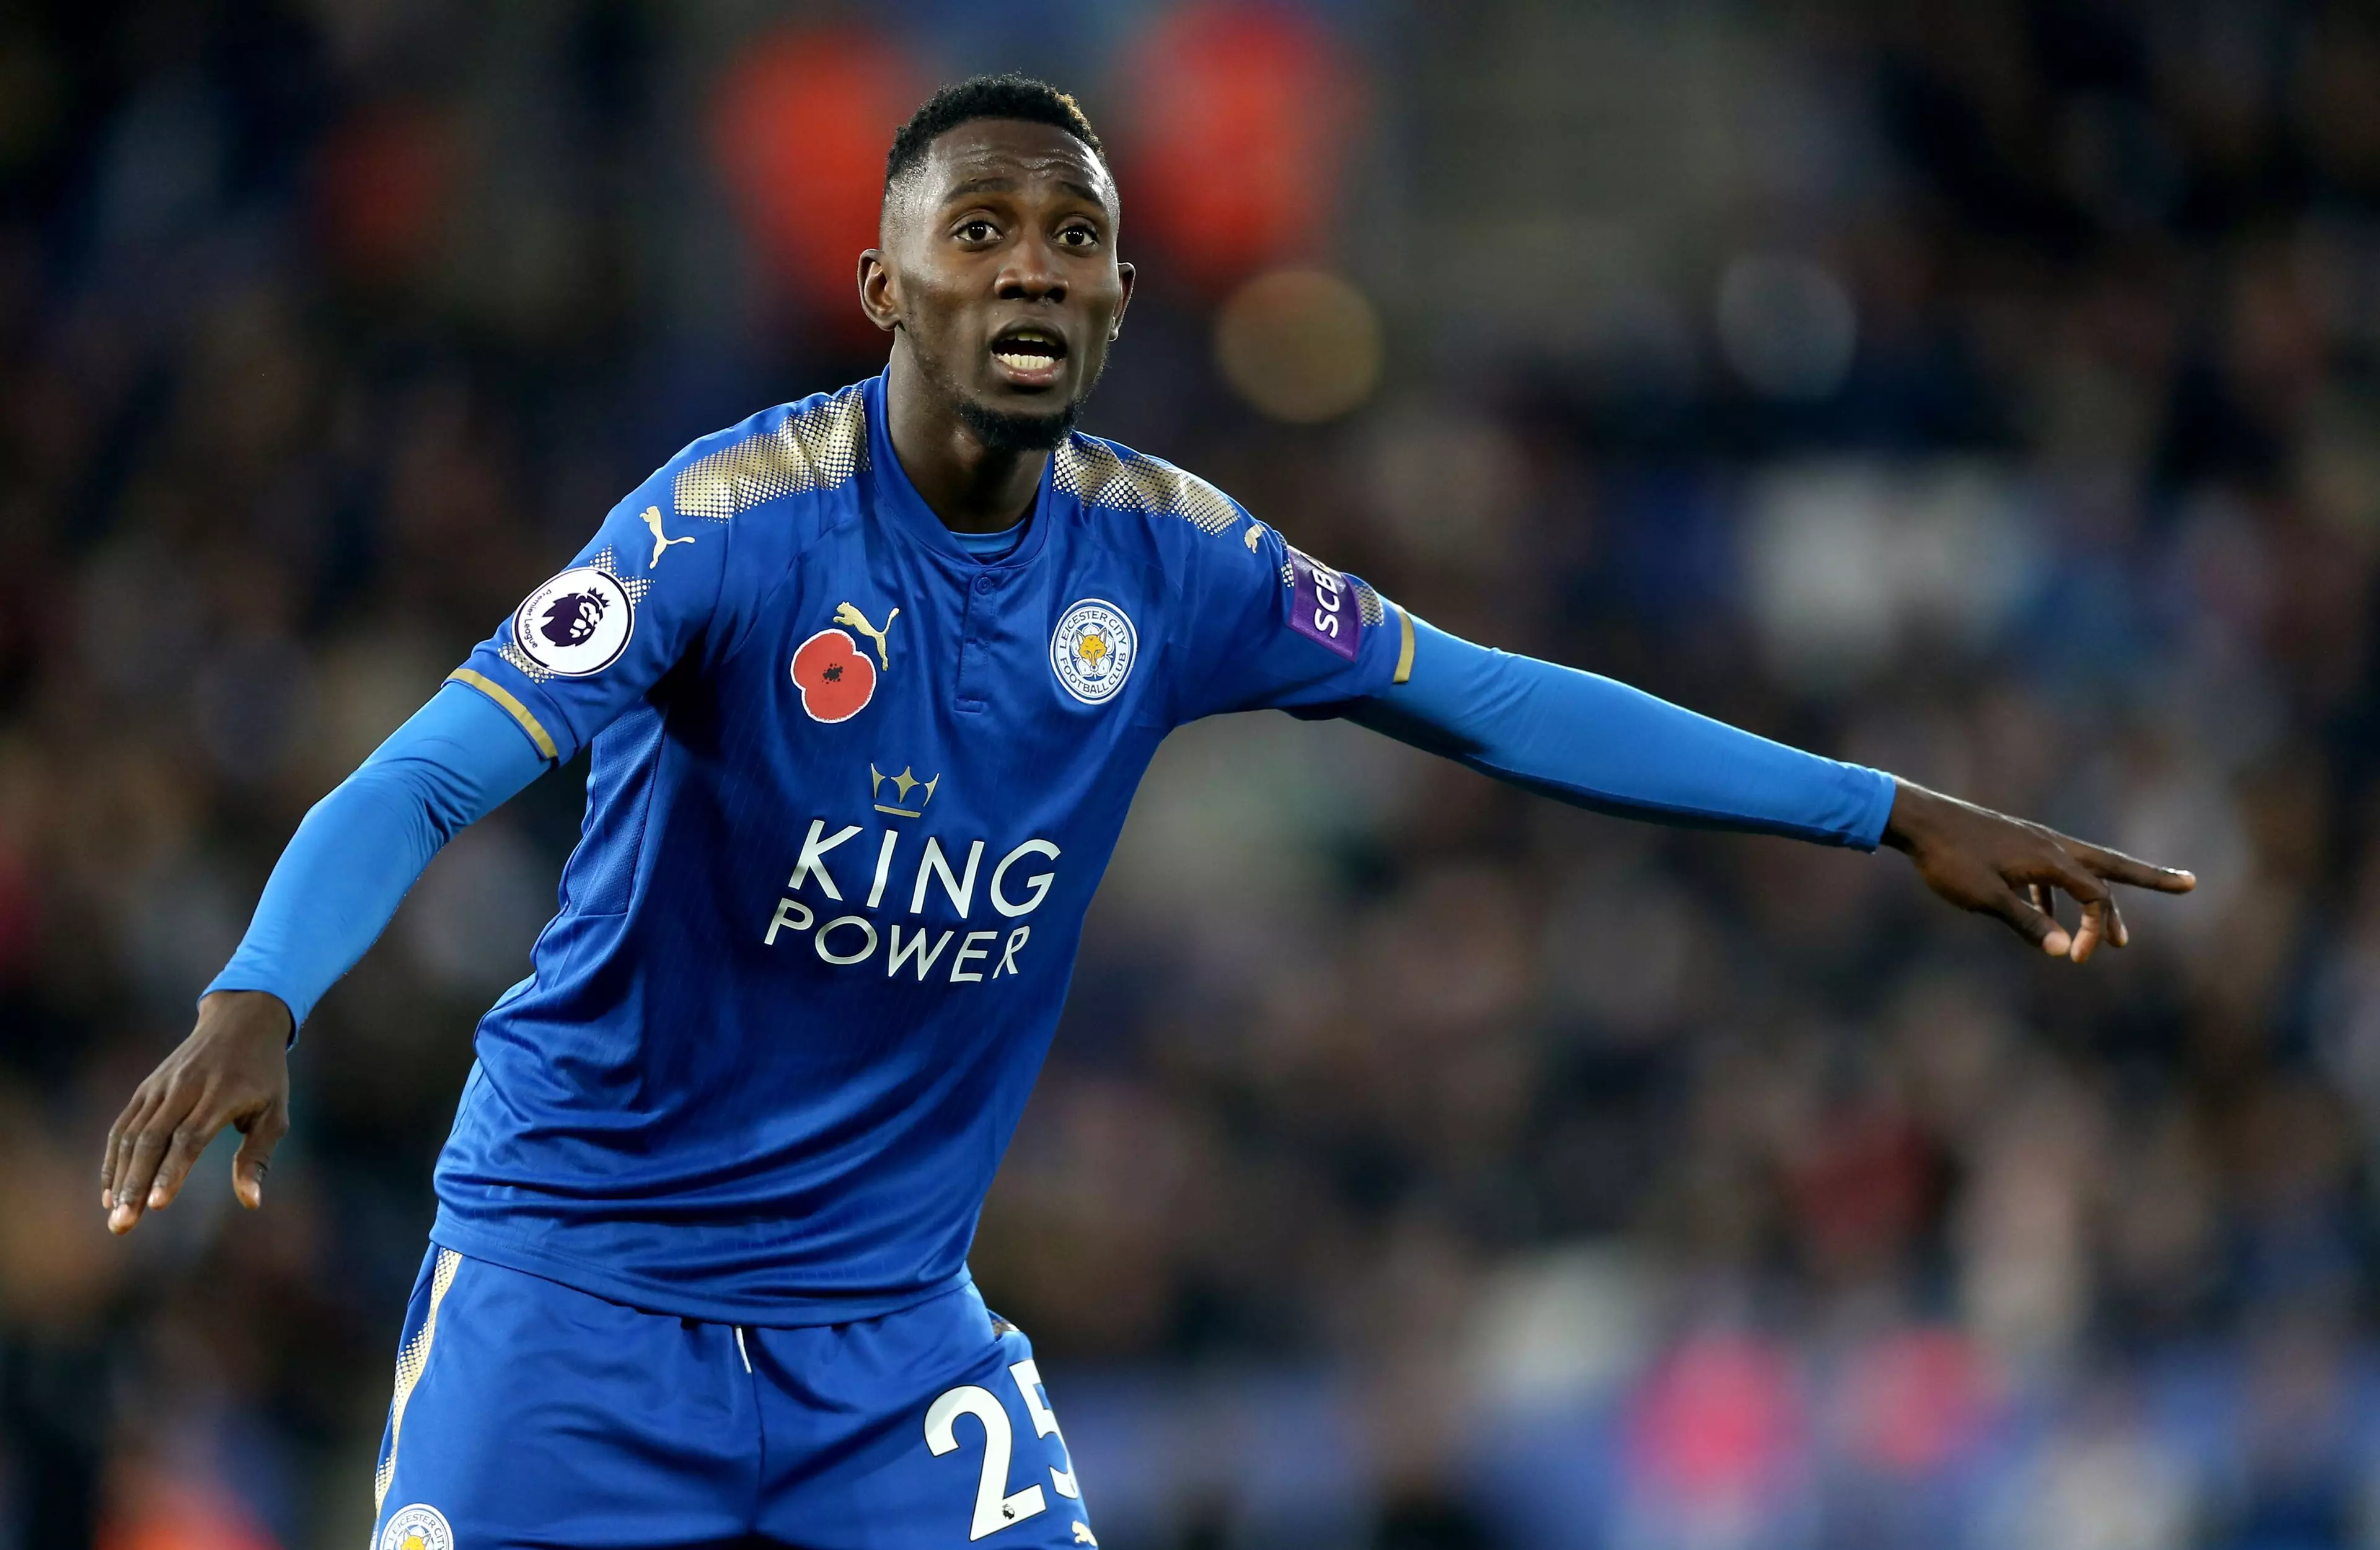 Ndidi in action for Leicester City. Image: PA